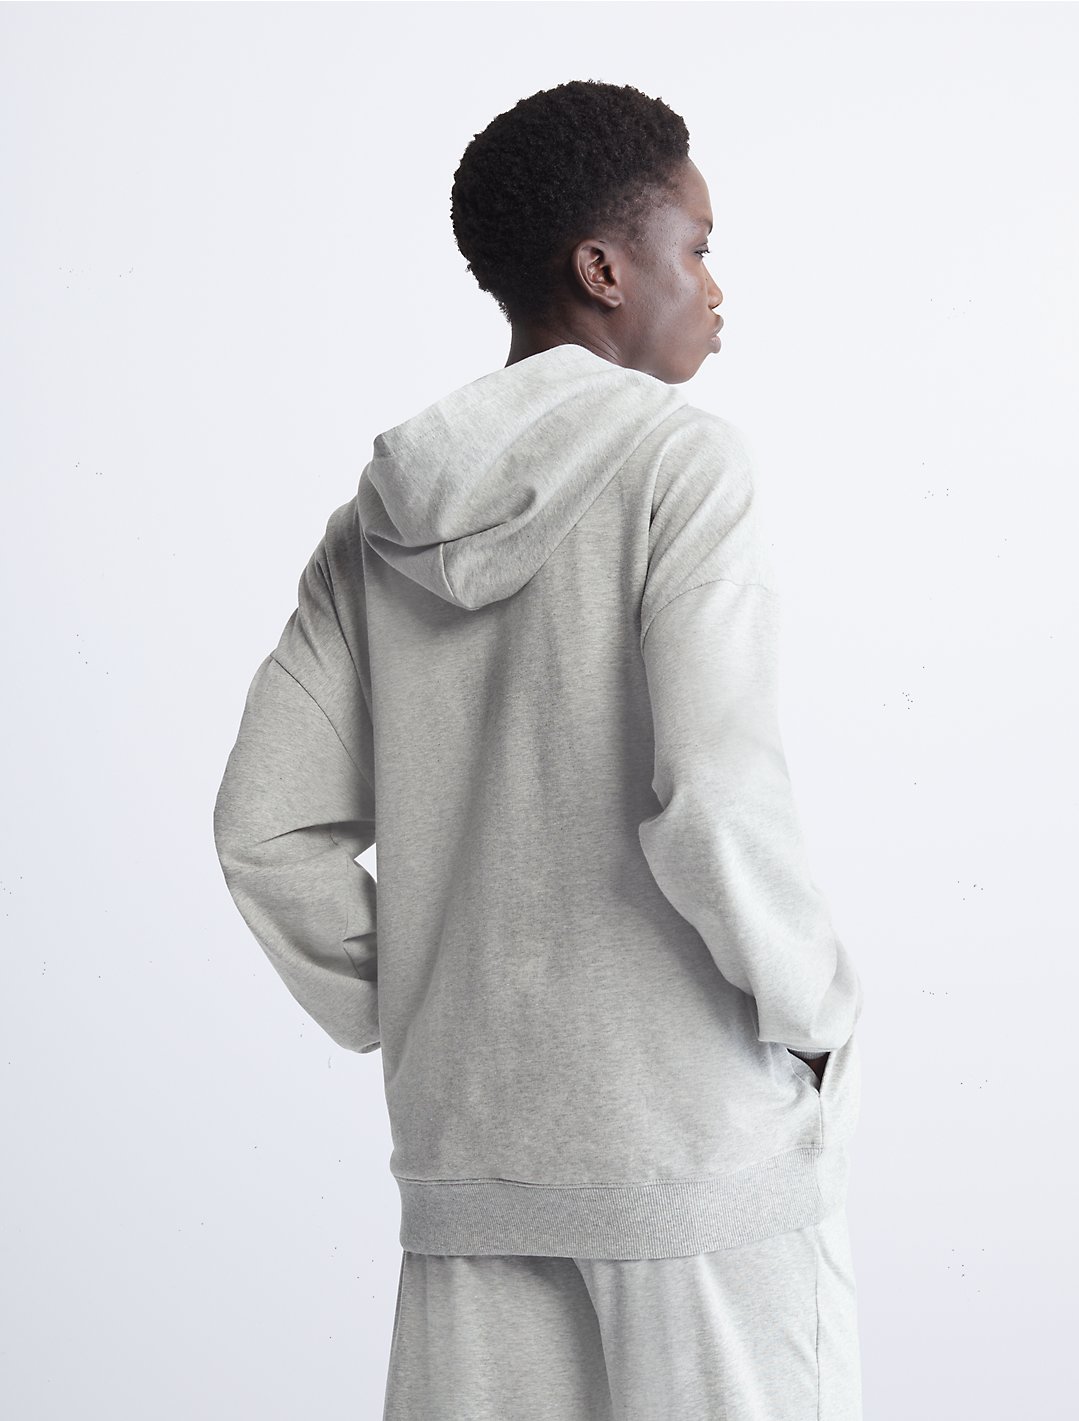 Embossed Icon Lounge Hoodie | Calvin Klein® USA